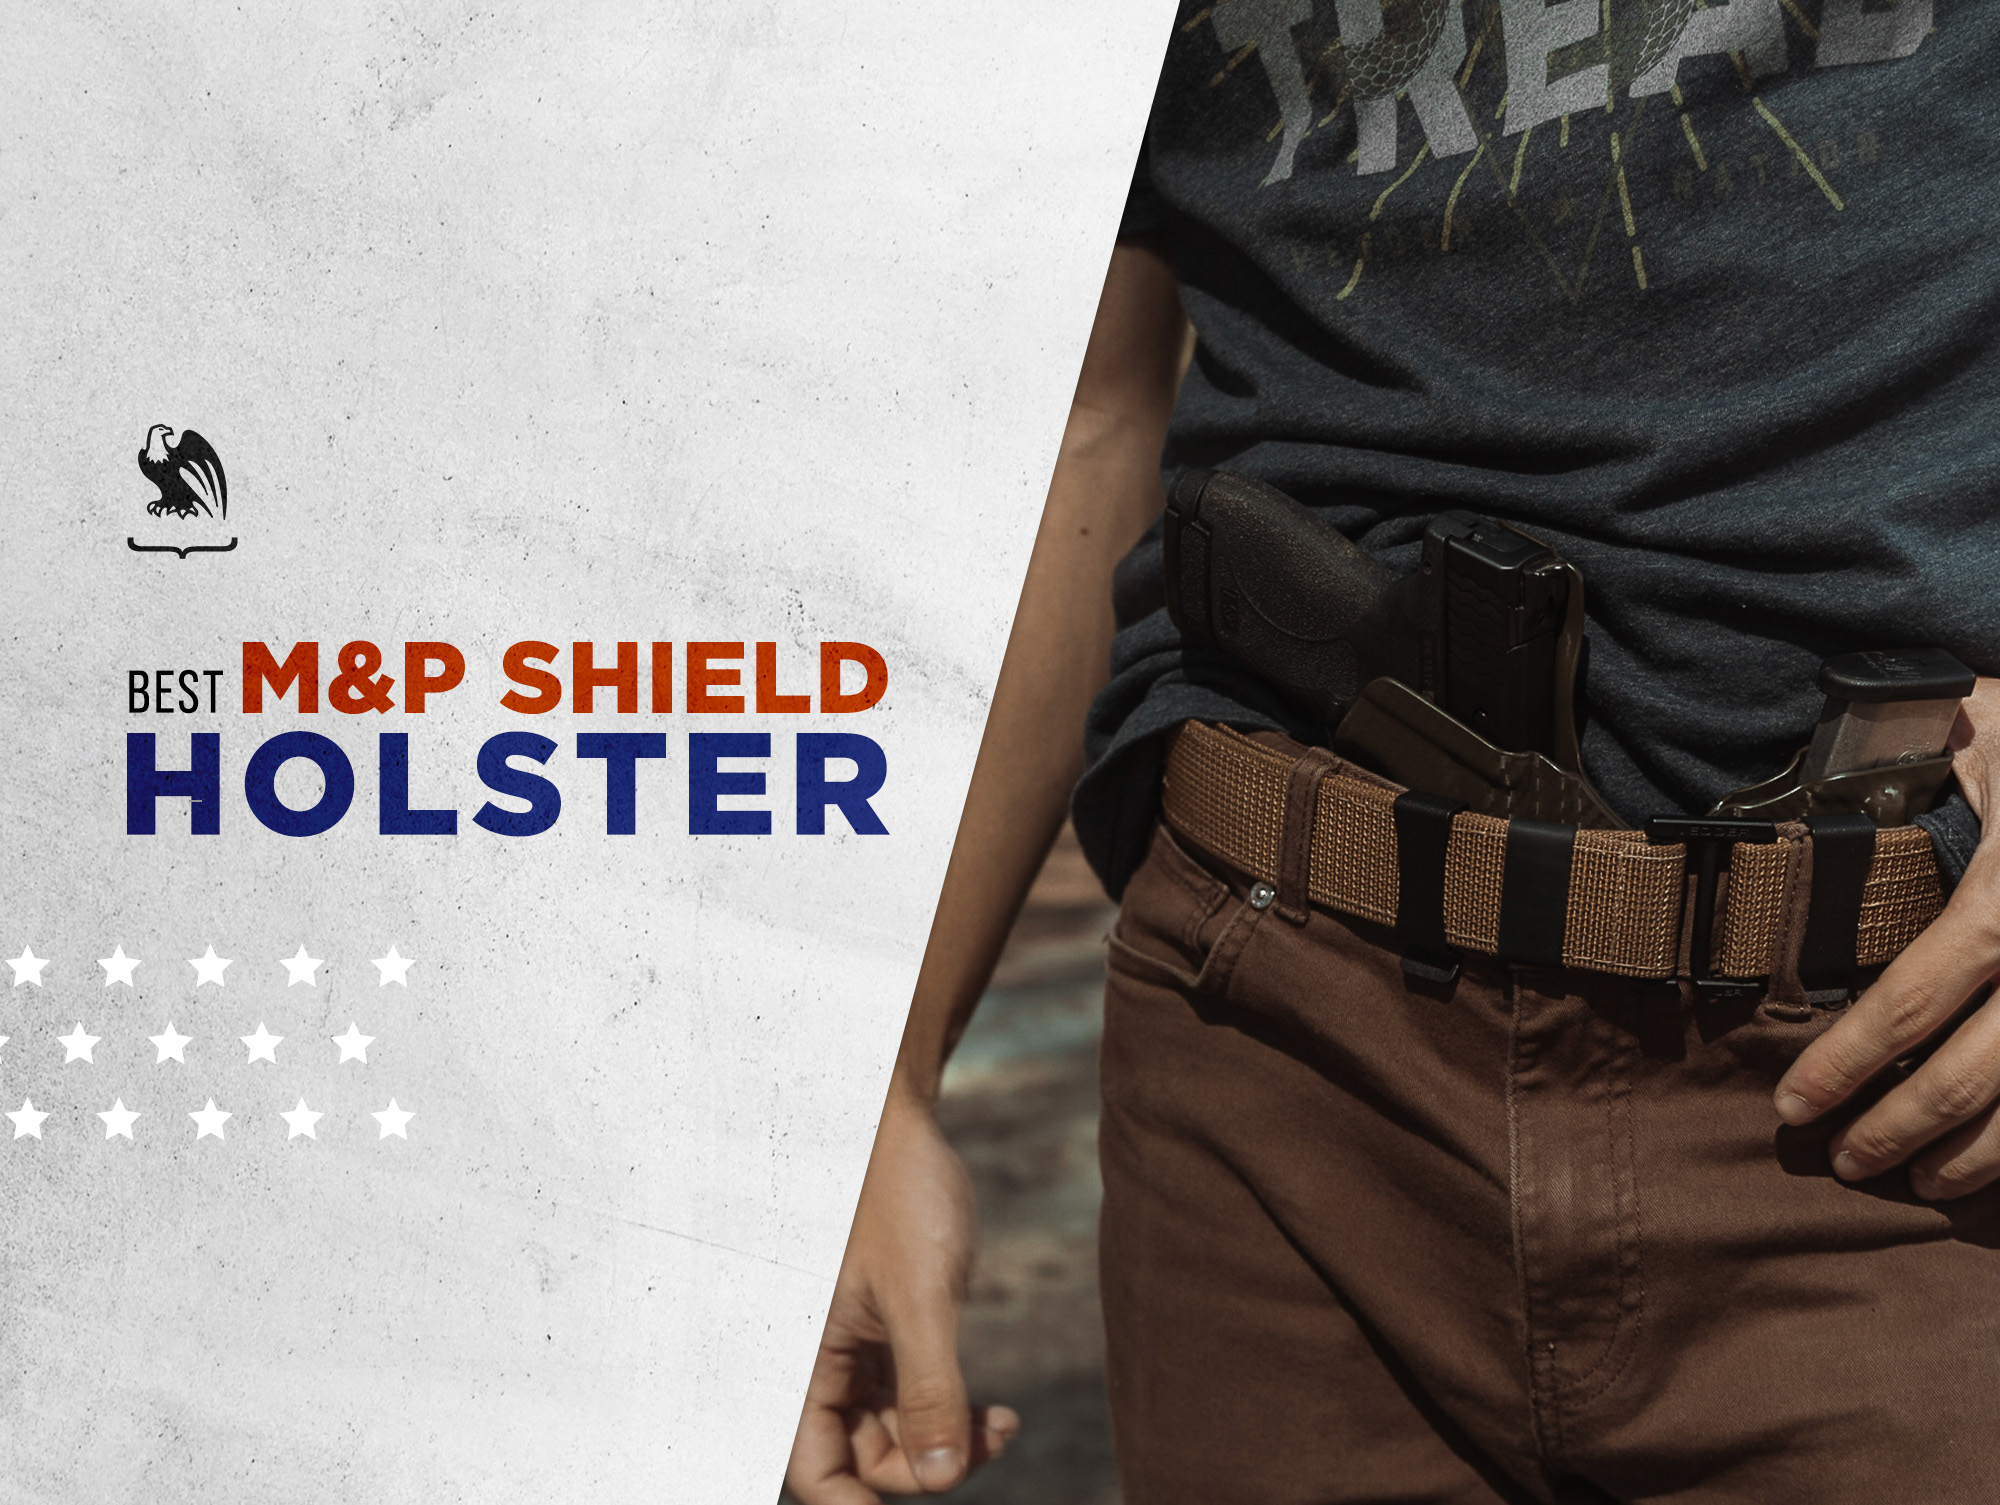 Belt Loop High Ride In The Waistband IWB Premium Leather Holster